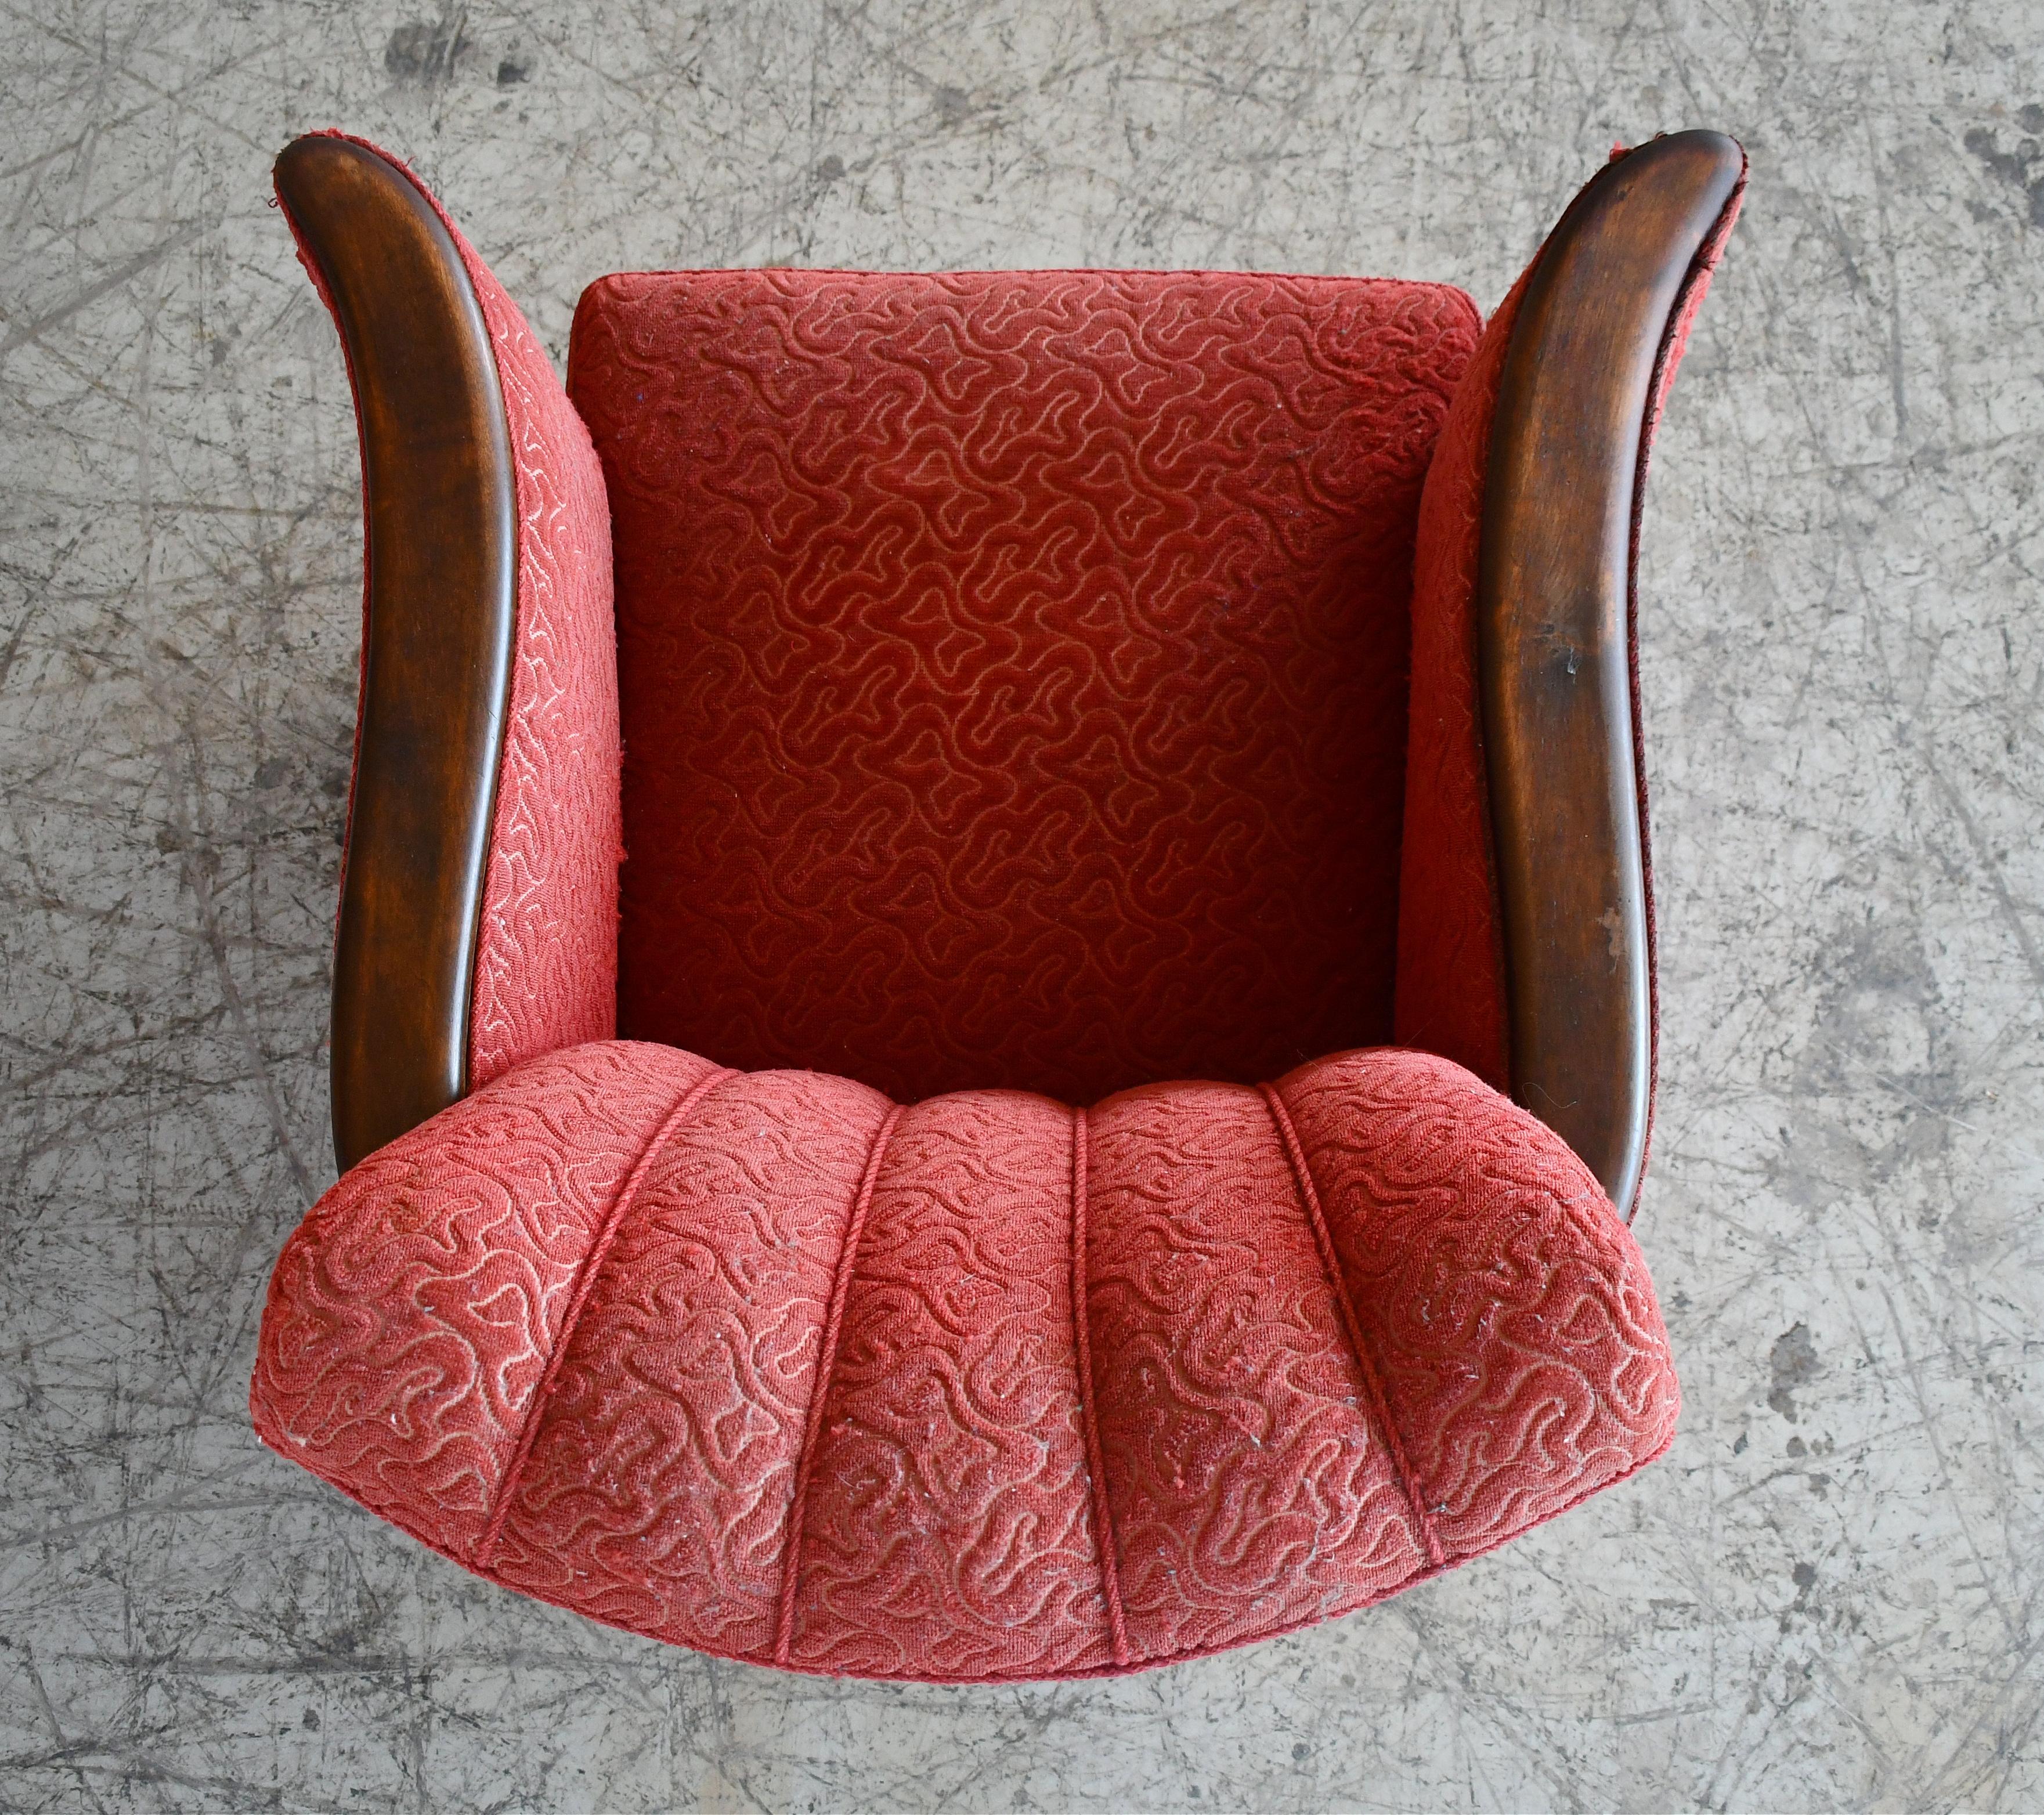 Danish 1930s Art Deco Lounge Chair in Red Mohair with Mahogany Accents For Sale 3